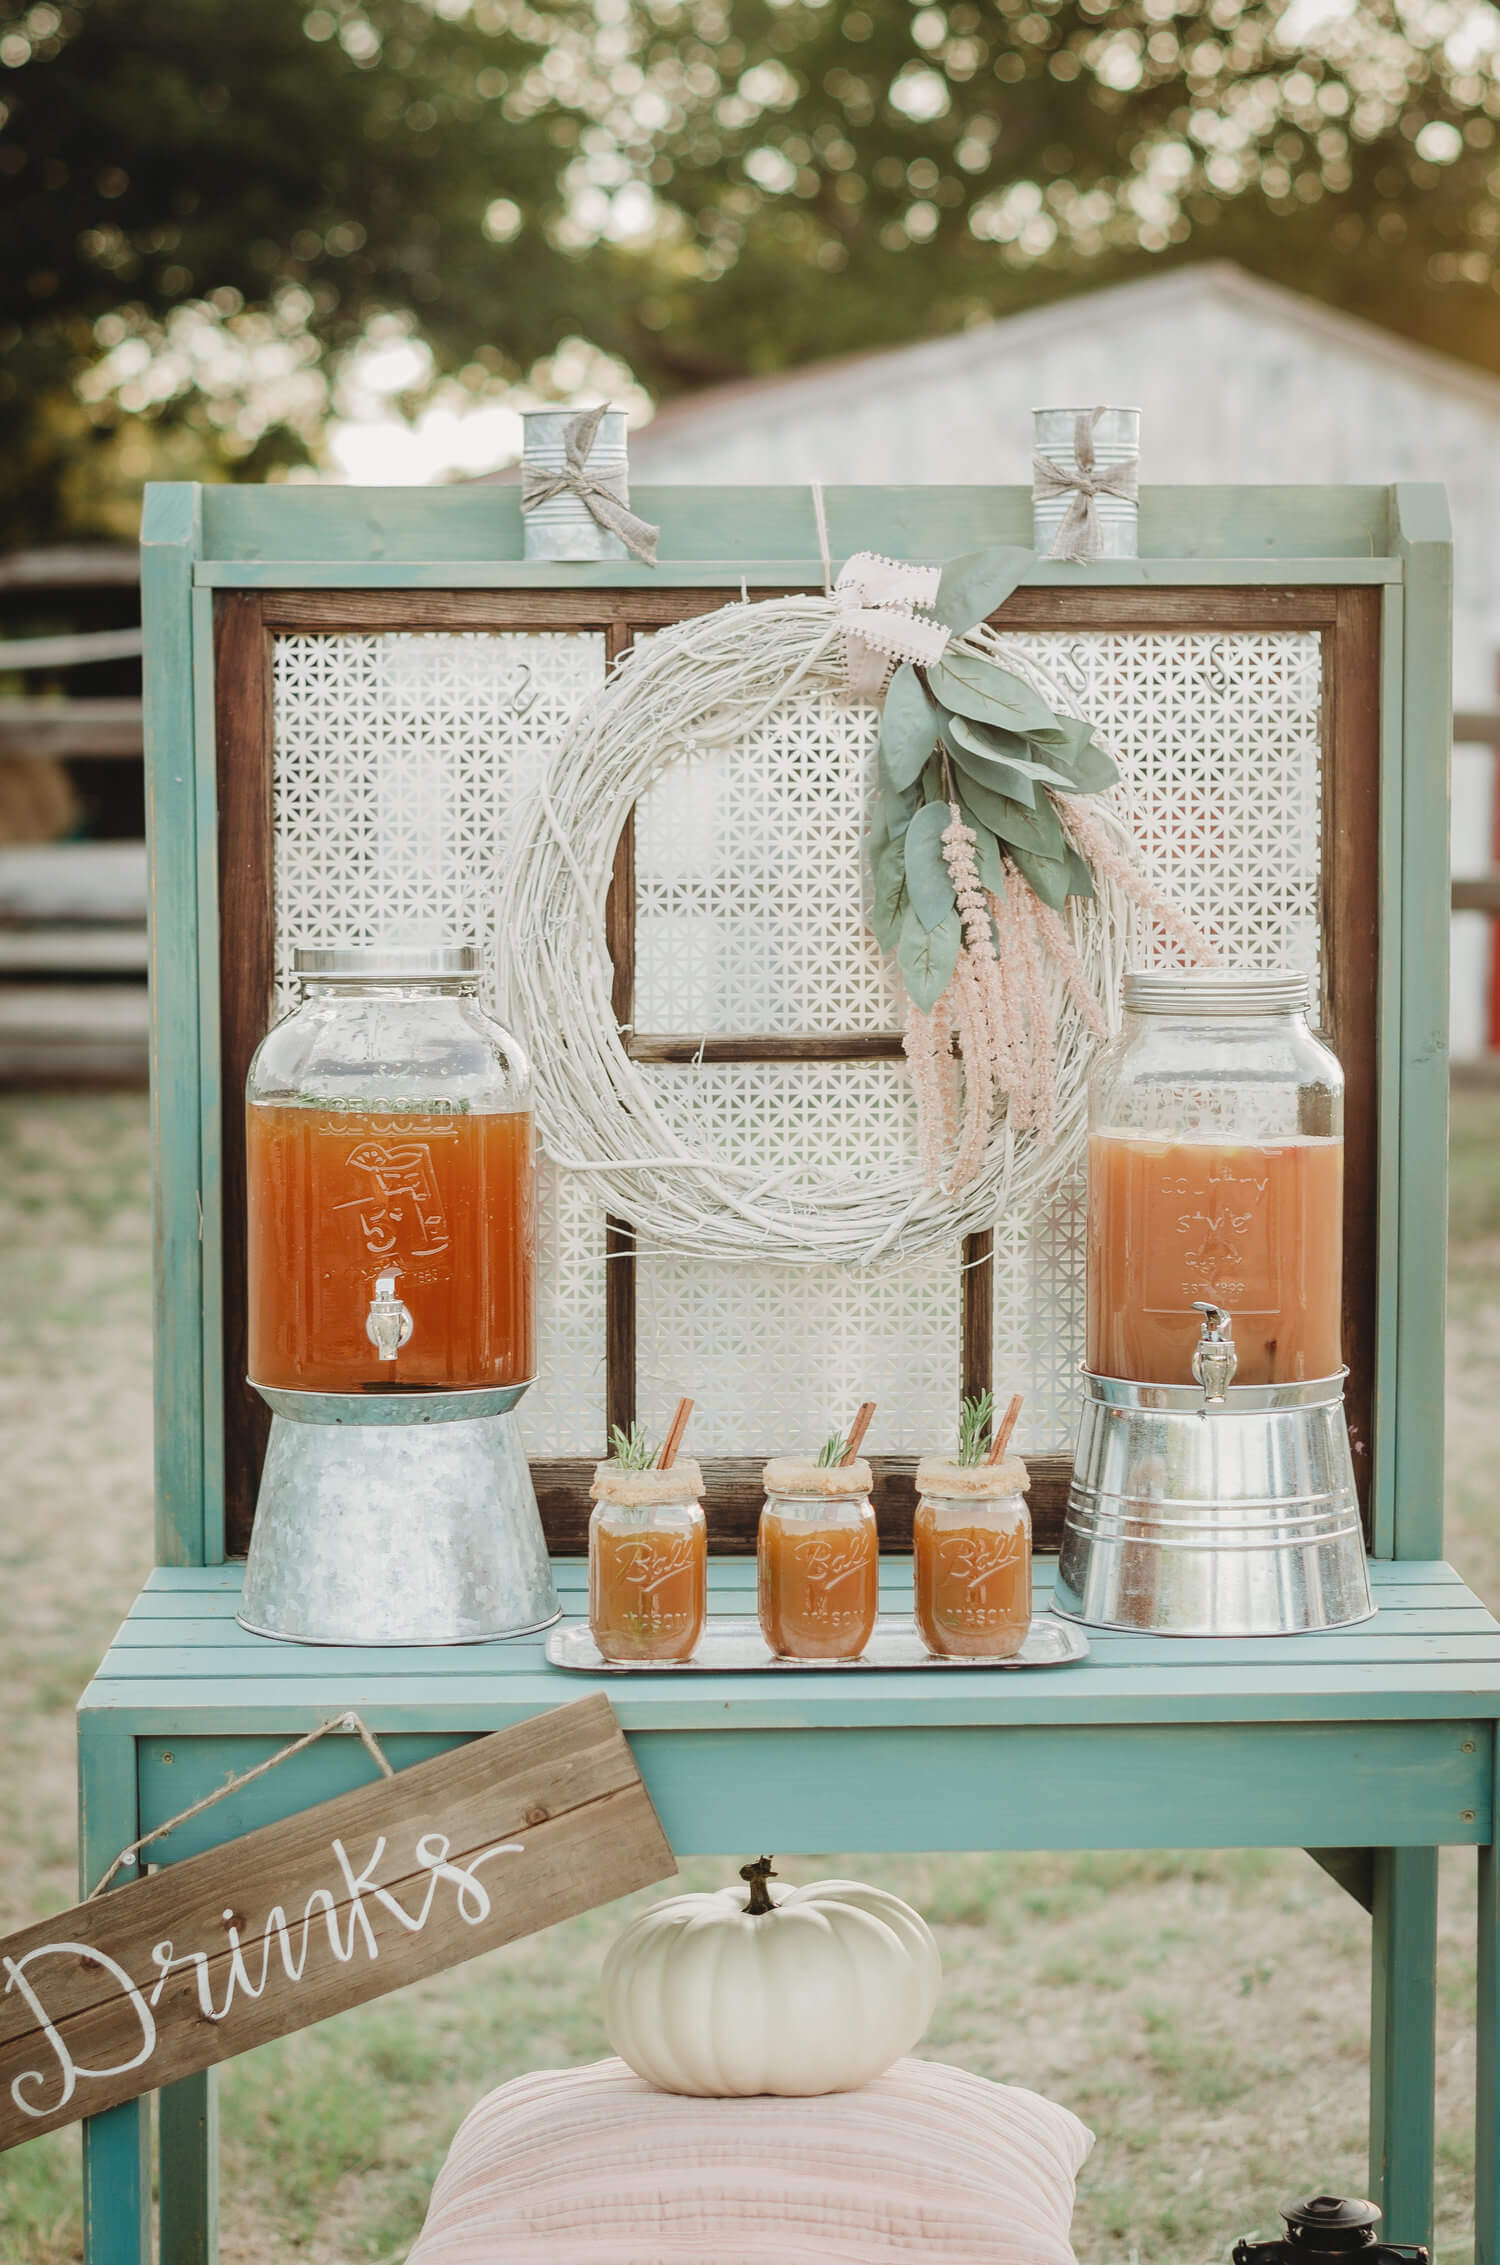 drink station ideas for your next party (or shower or wedding!)